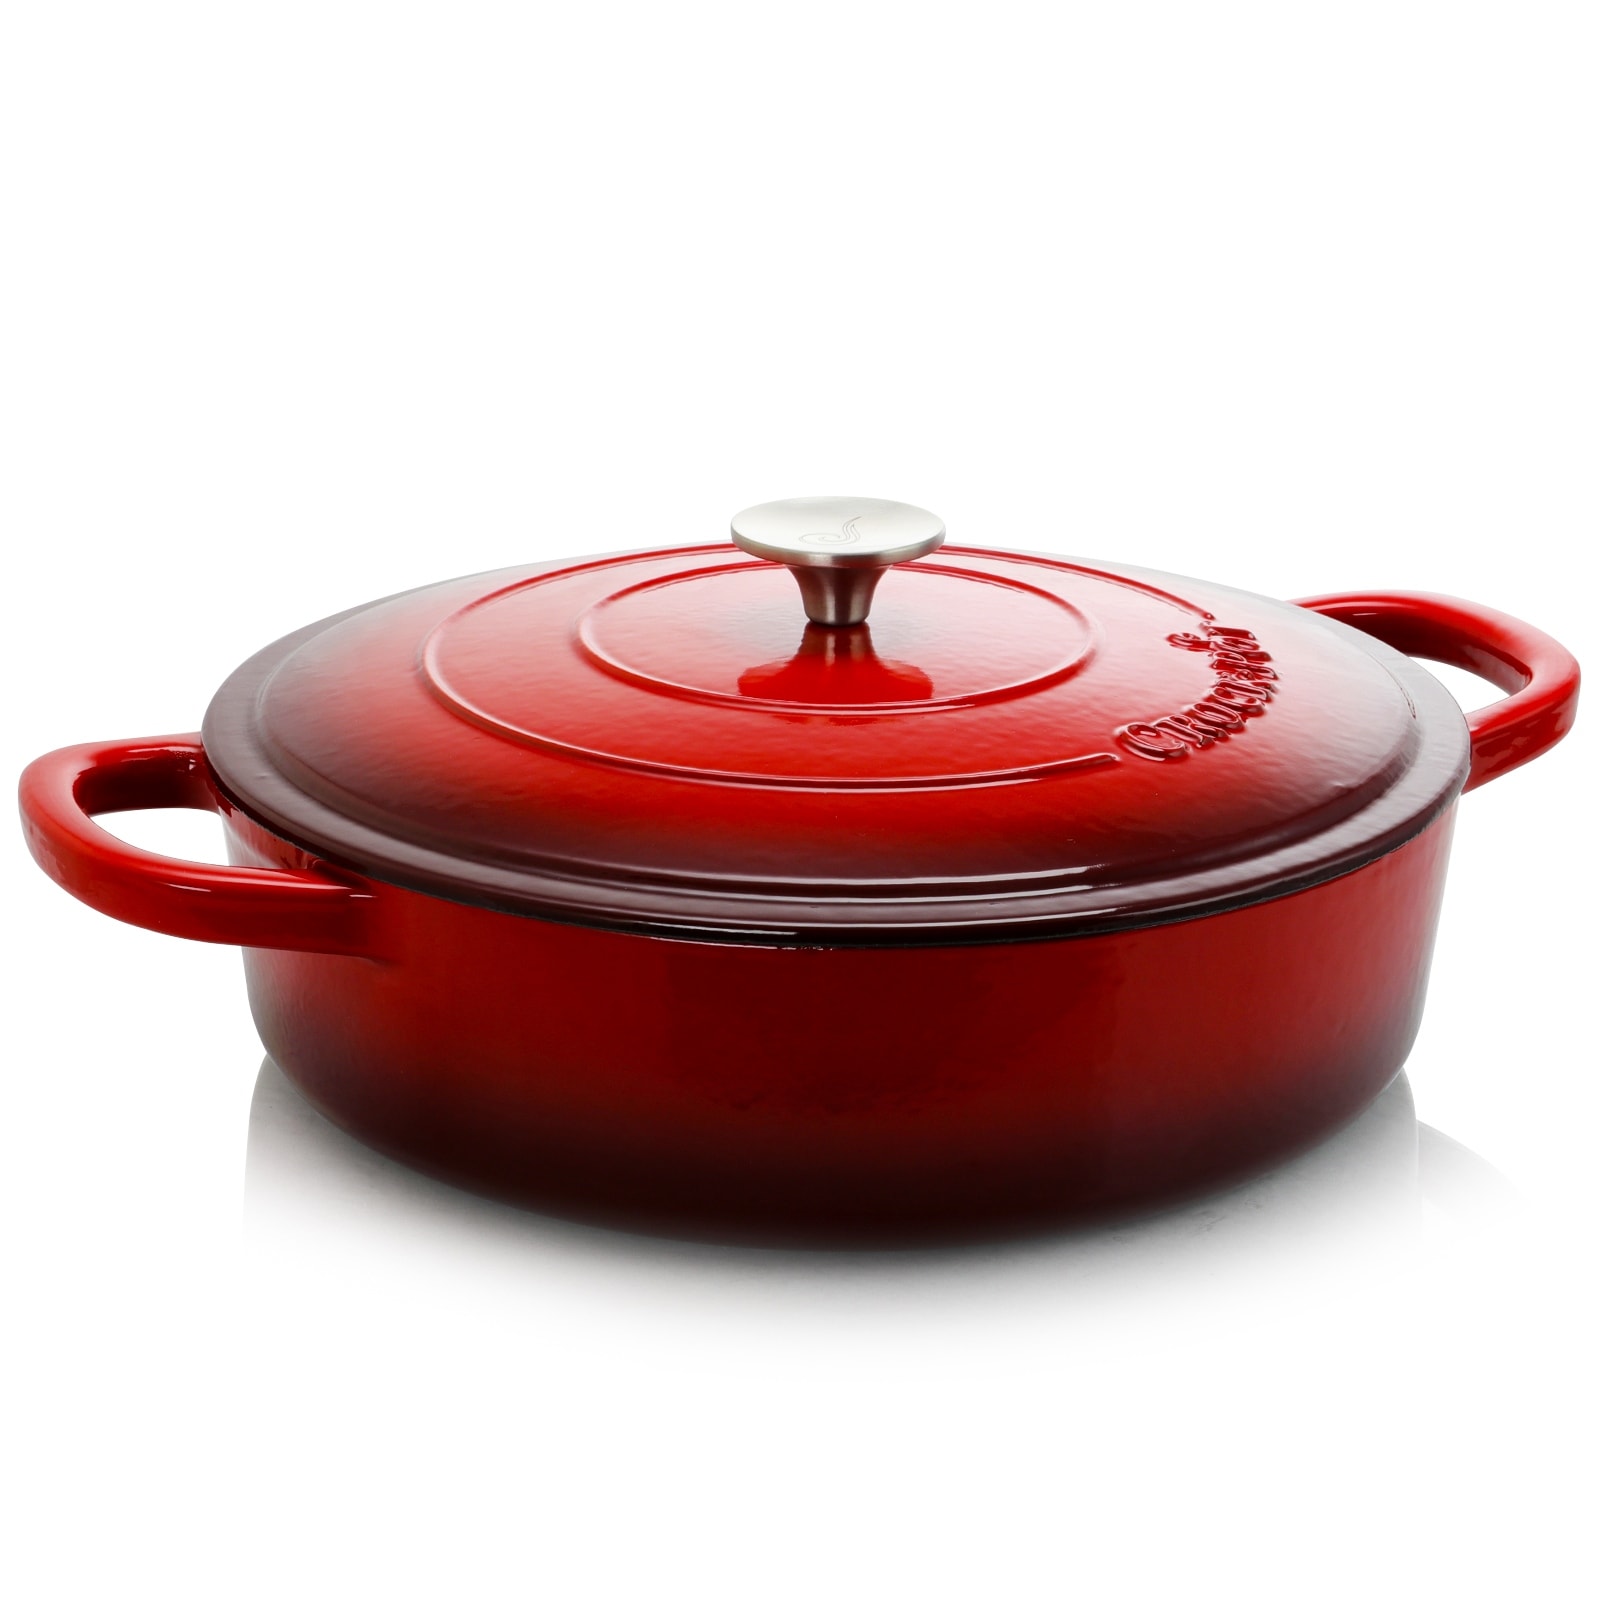 https://ak1.ostkcdn.com/images/products/is/images/direct/f8366eb0d6d640bb2e7eb3aa239c086a52e38aee/Enameled-Cast-Iron-5-Quart-Round-Braising-Pan-W--Lid-in-Ruby.jpg